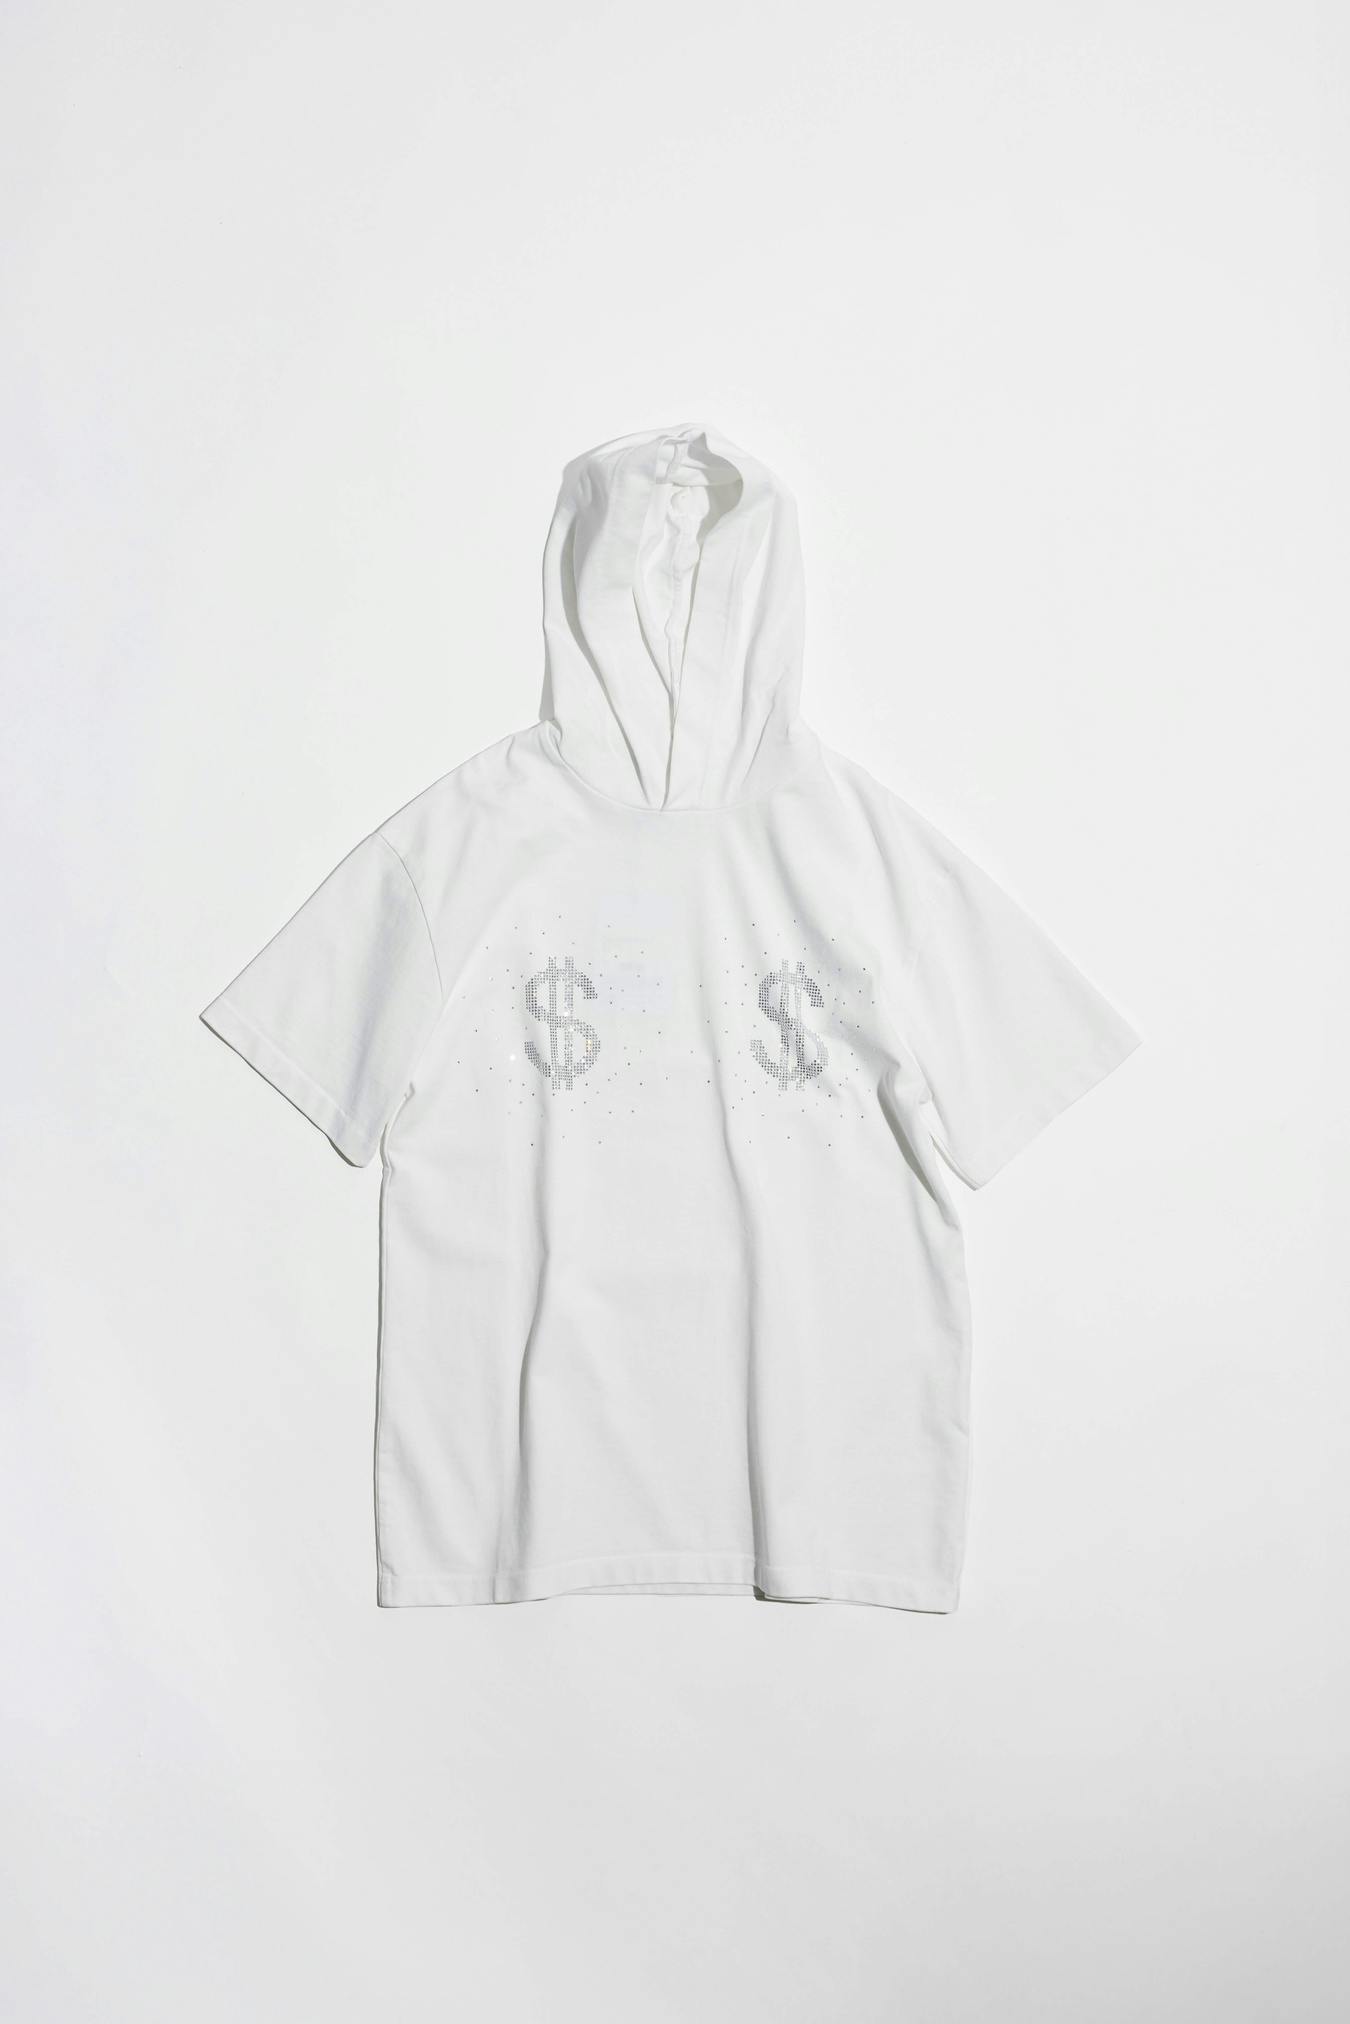 Hooded t-shirt $ $ ivory